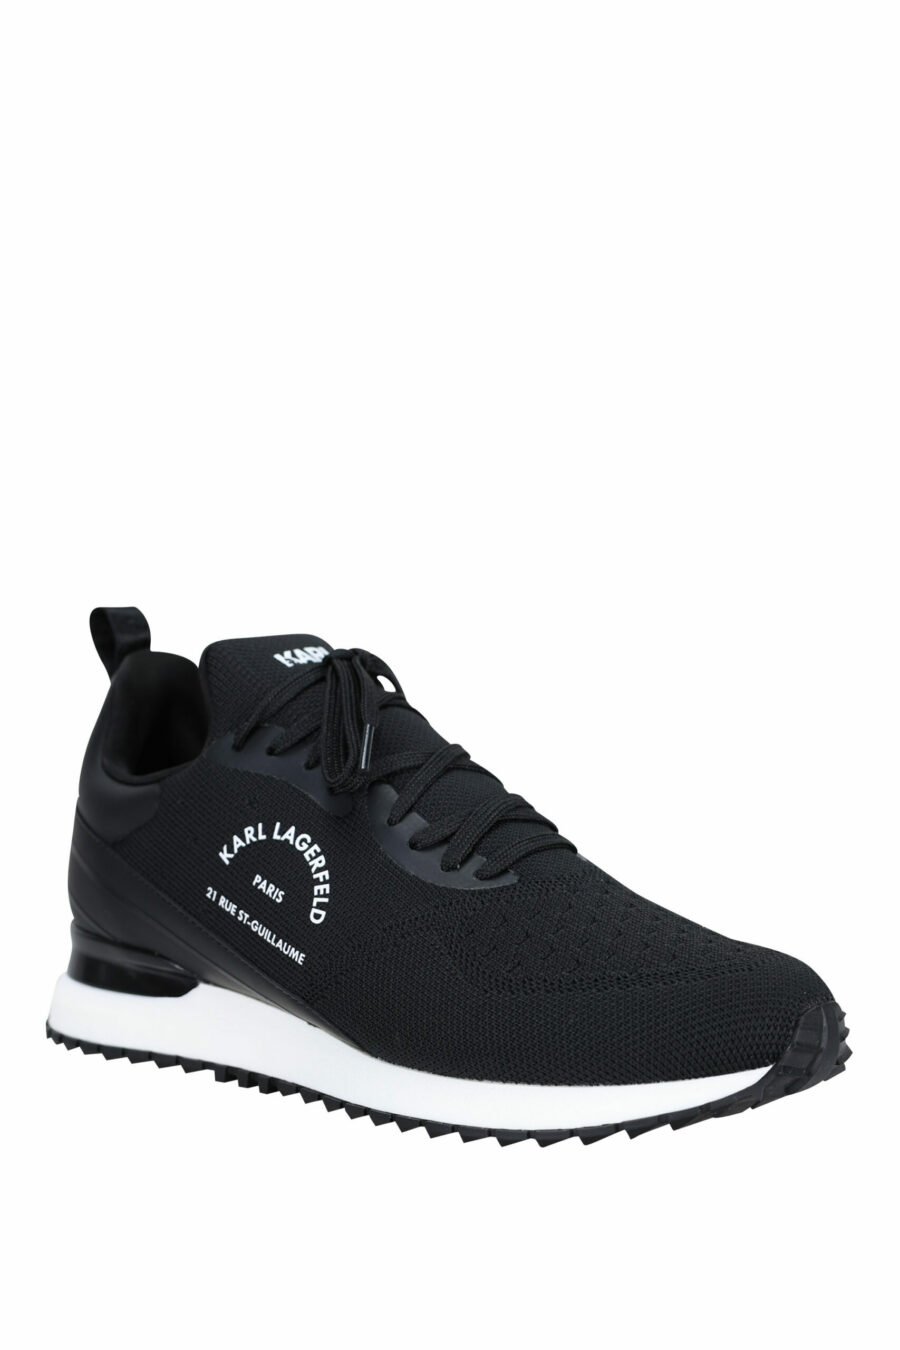 Black "velocitor" shoes with white "rue st guillaume" logo - 5059529326370 1 scaled